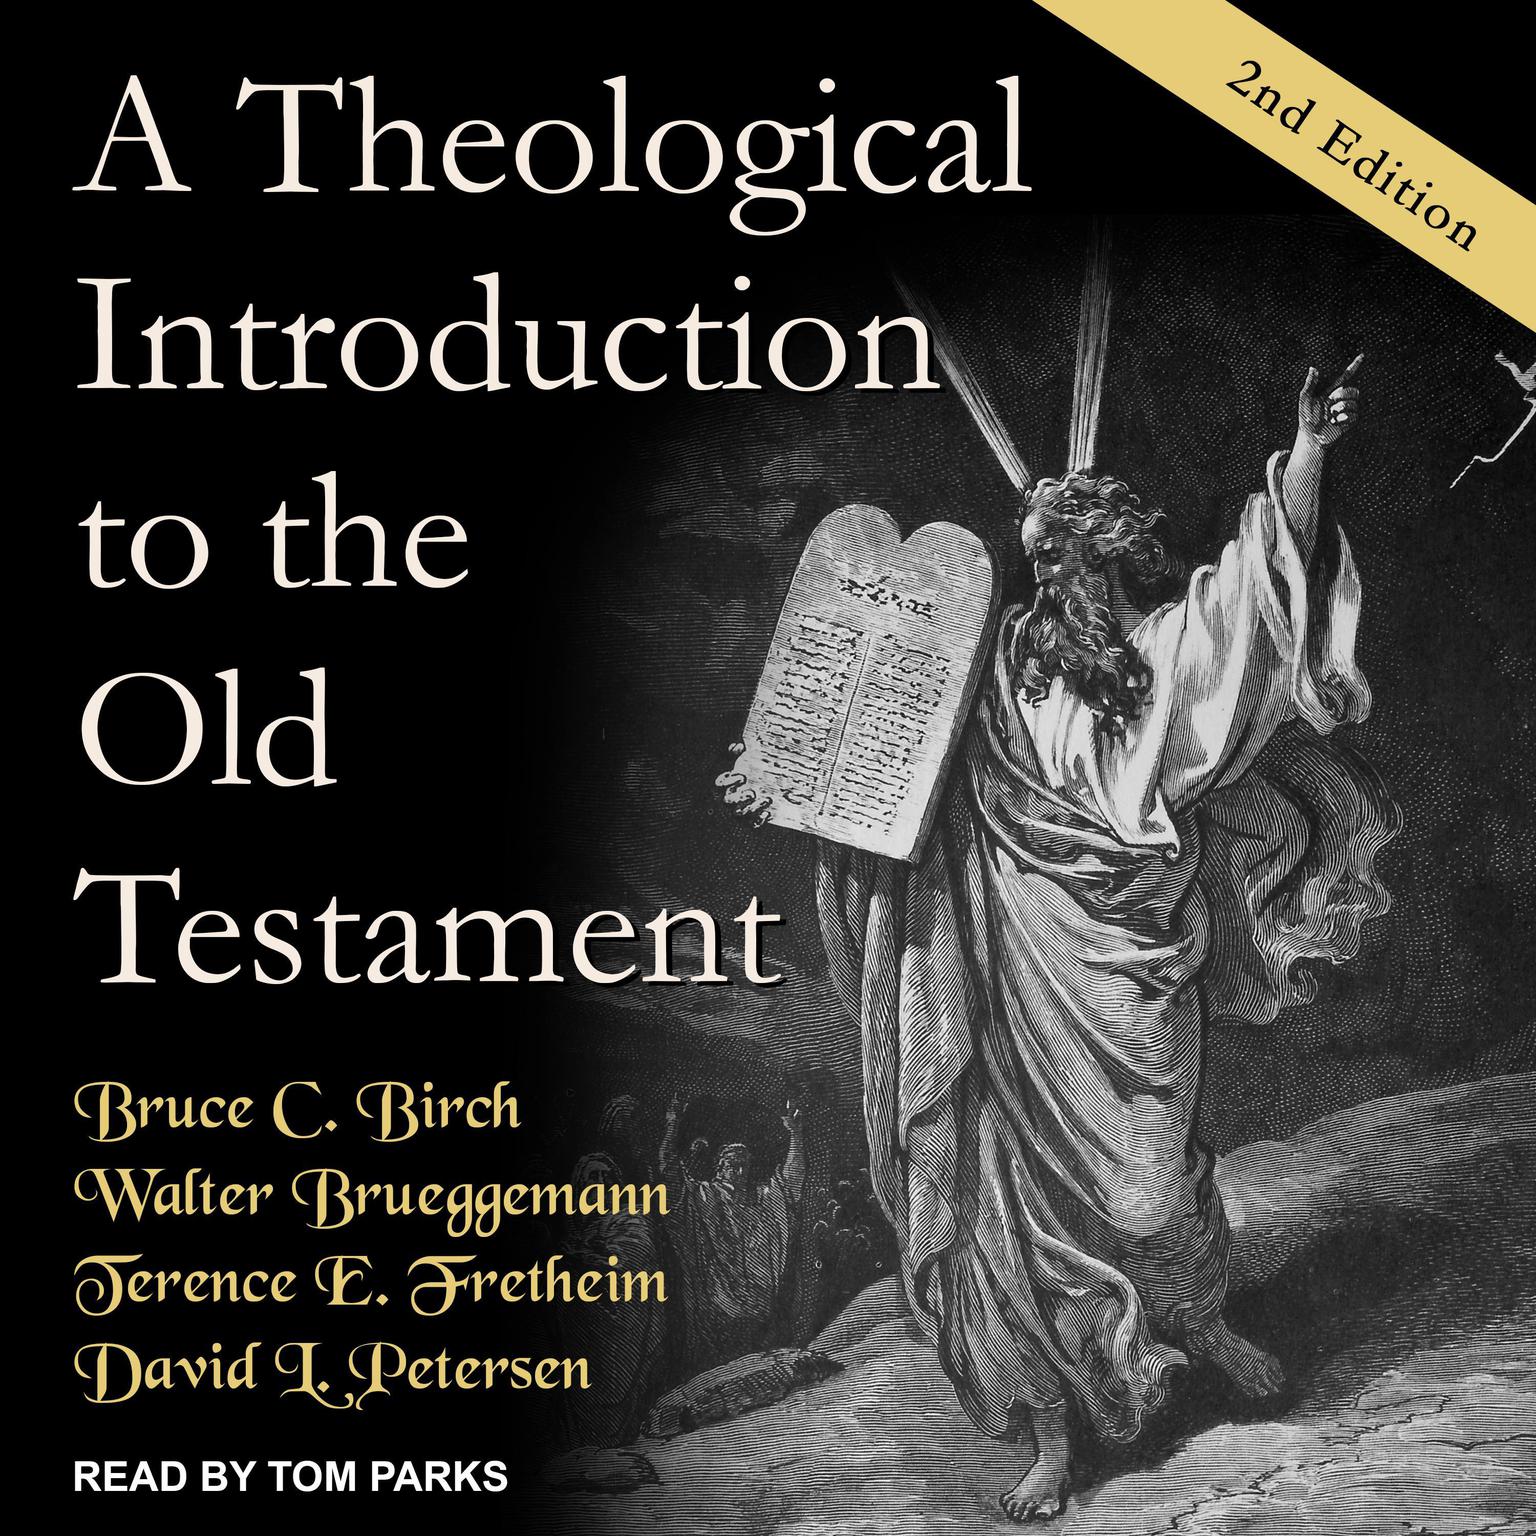 A Theological Introduction to the Old Testament: 2nd Edition Audiobook, by Walter Brueggemann